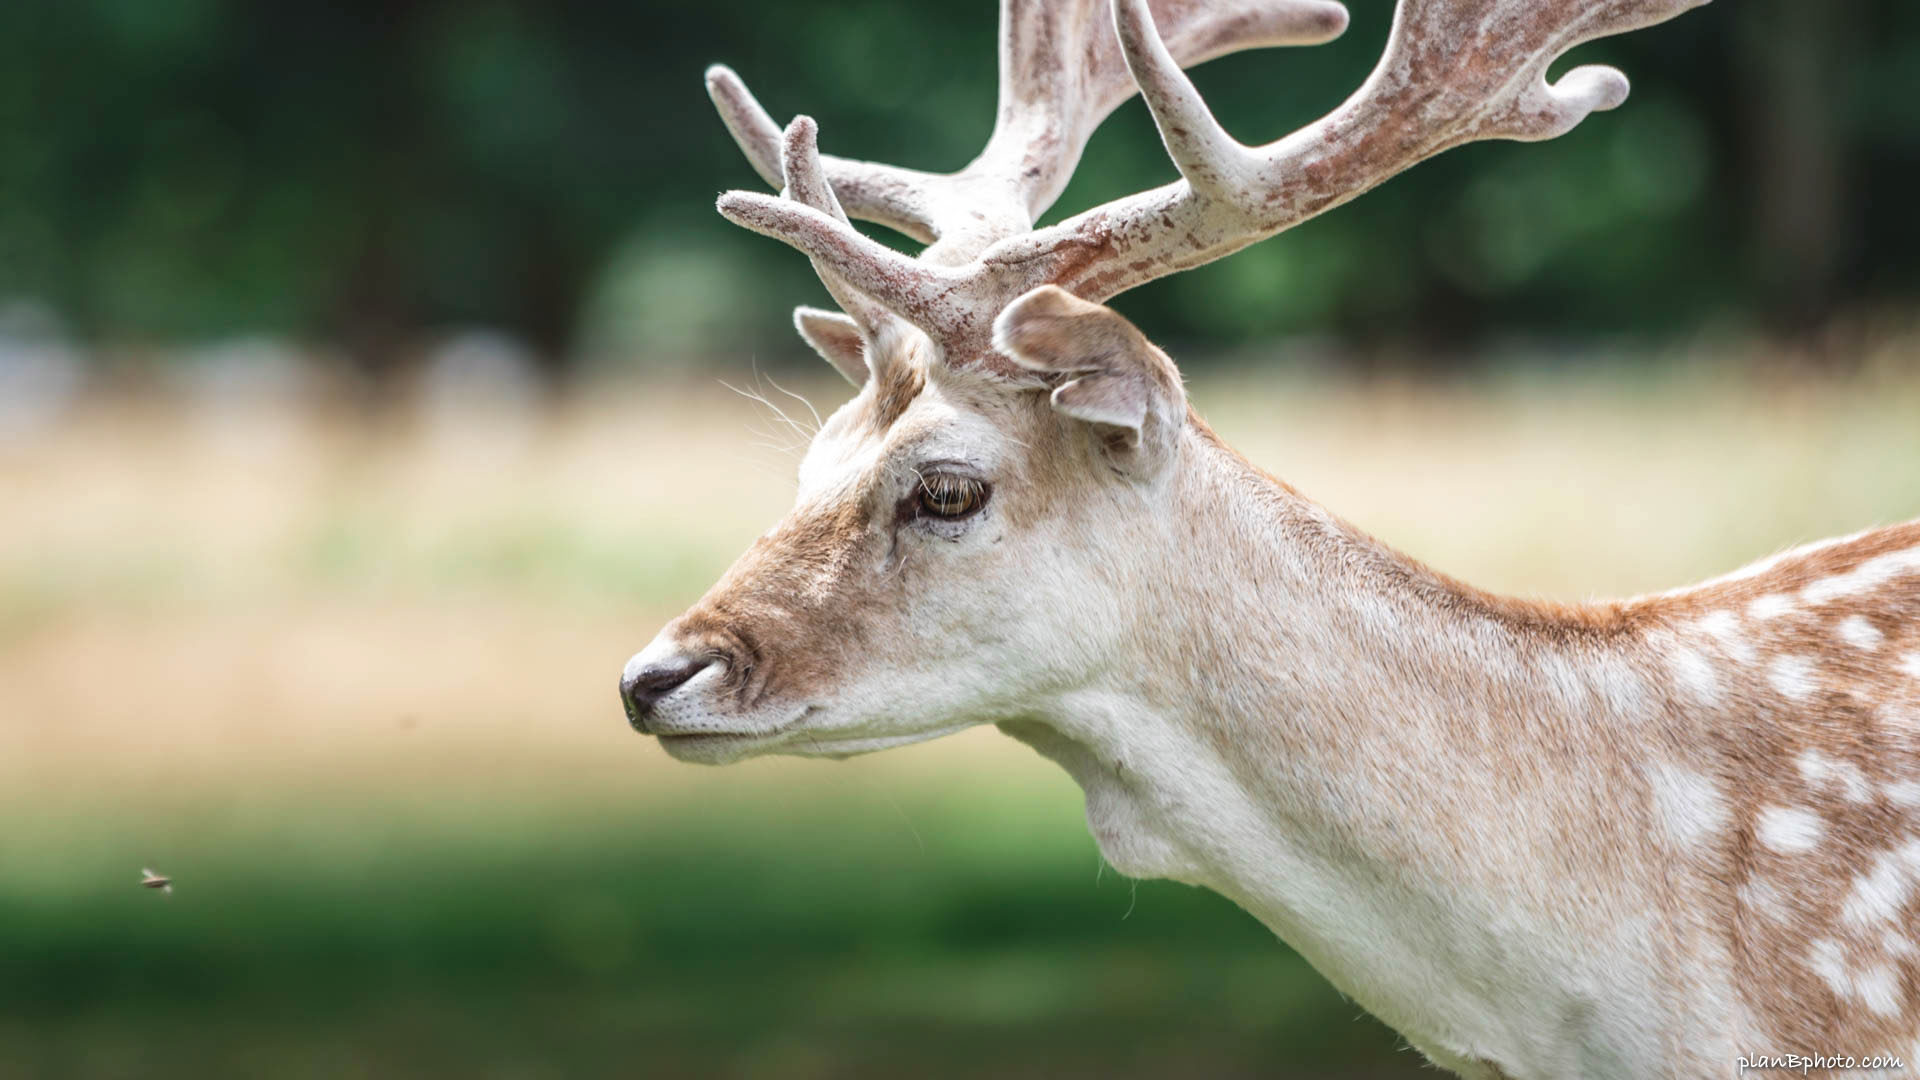 Close up of a fallow deer at one of the parks in London